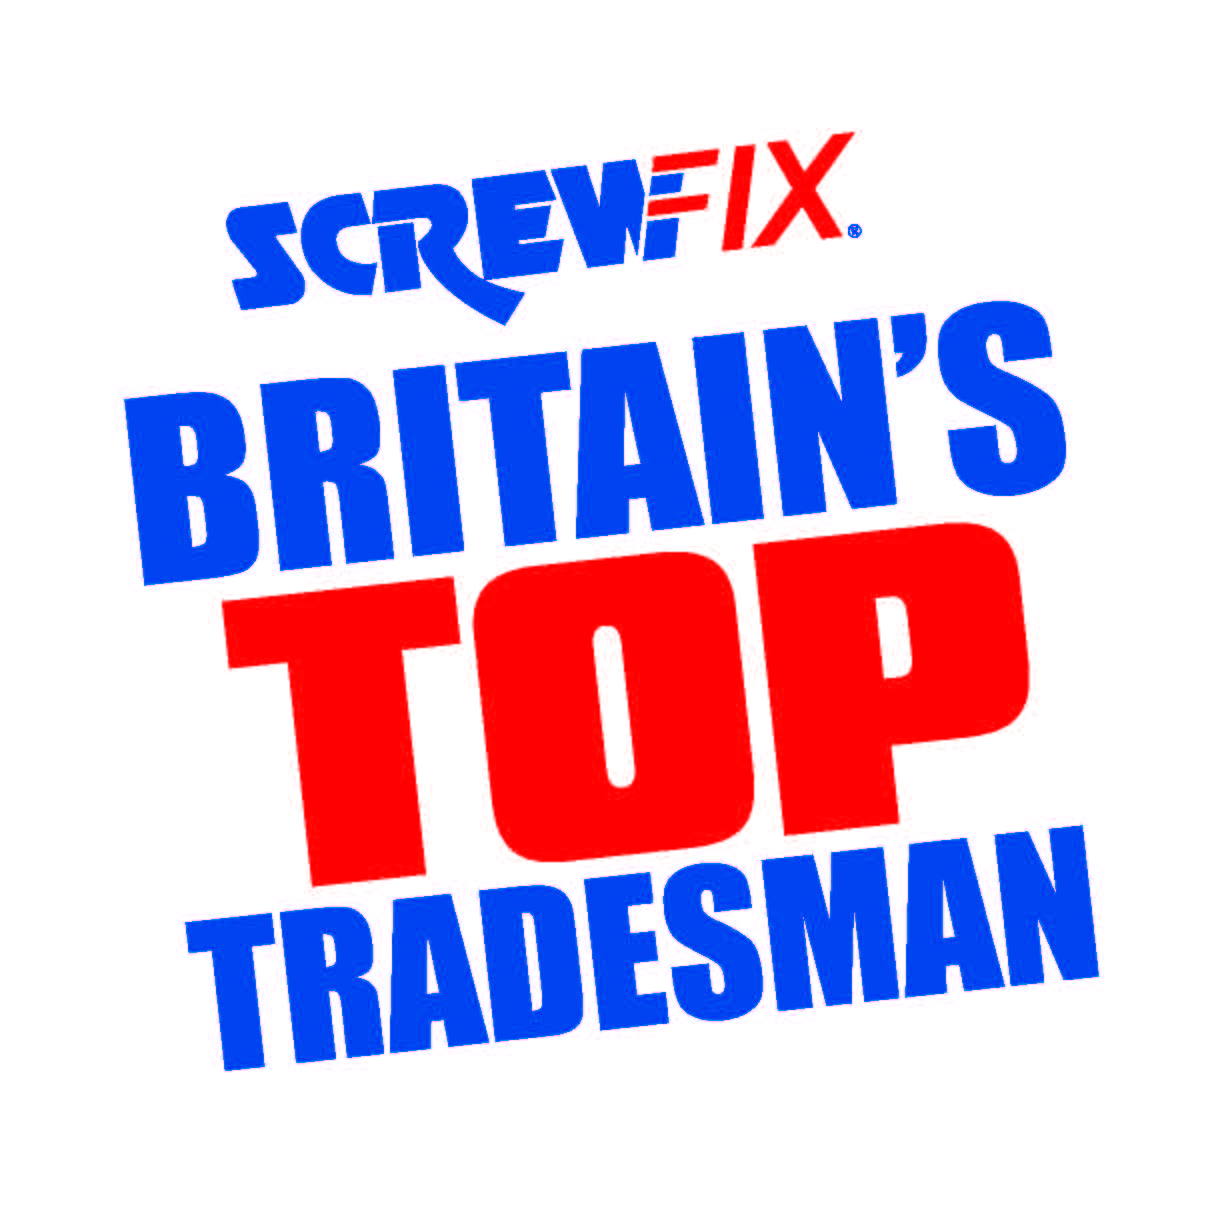 The Search is Back on for Screwfix’s Britain’s Top Tradesman 2013. Have You Got What it Takes to be Crowned Top of the Trade?